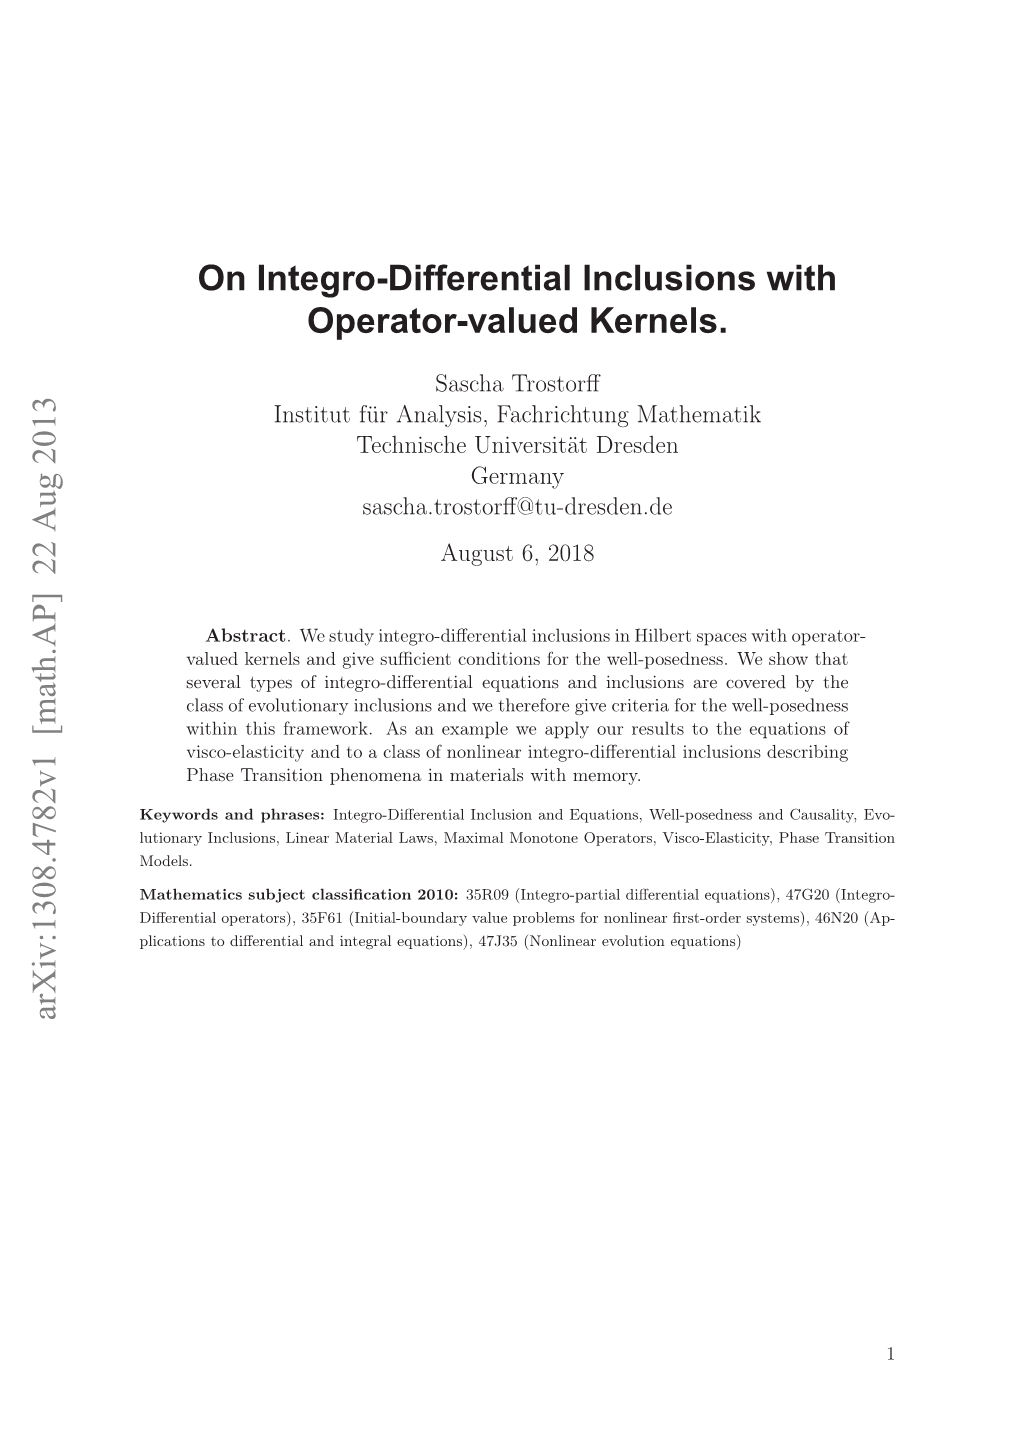 On Integro-Differential Inclusions with Operator-Valued Kernels